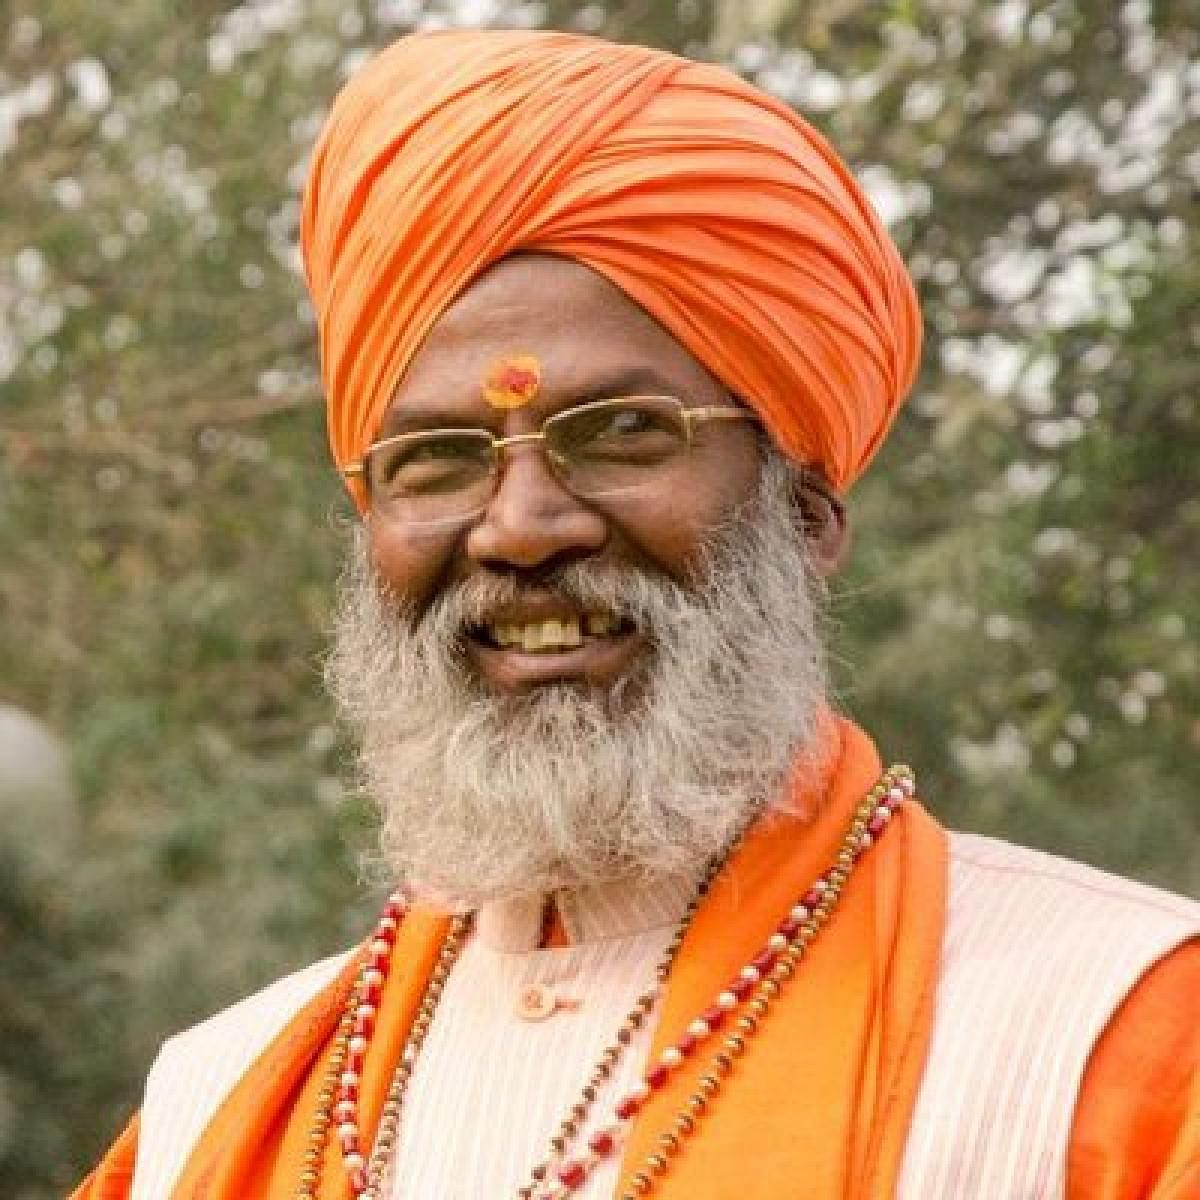 Sakshi Maharaj said that there must be some kind of control on non-veg food items.